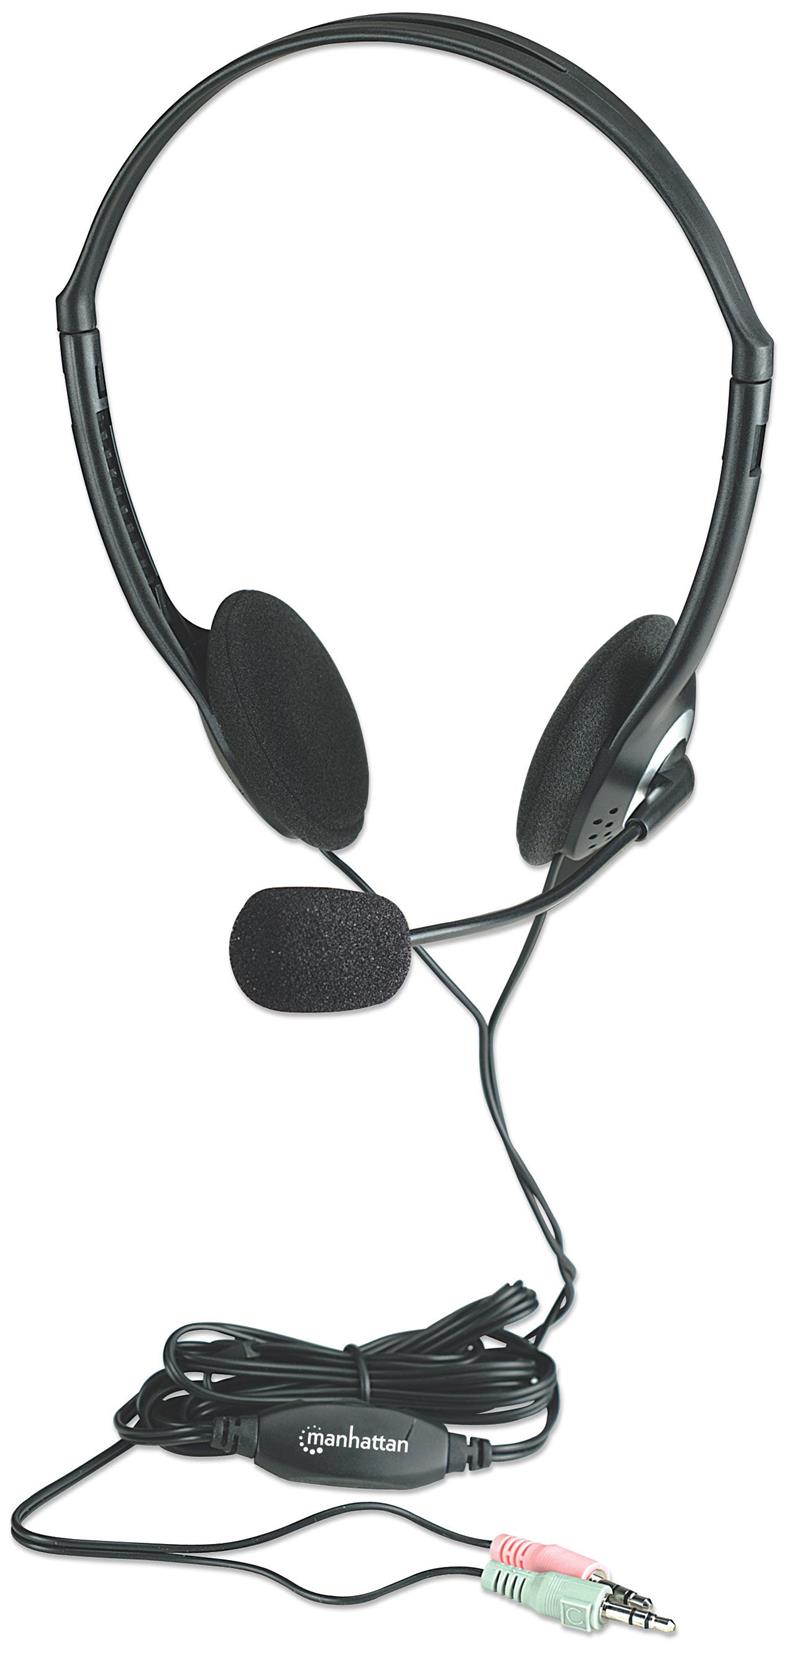 Stereo Headset - Lightweight design with microphone and in-line volume control